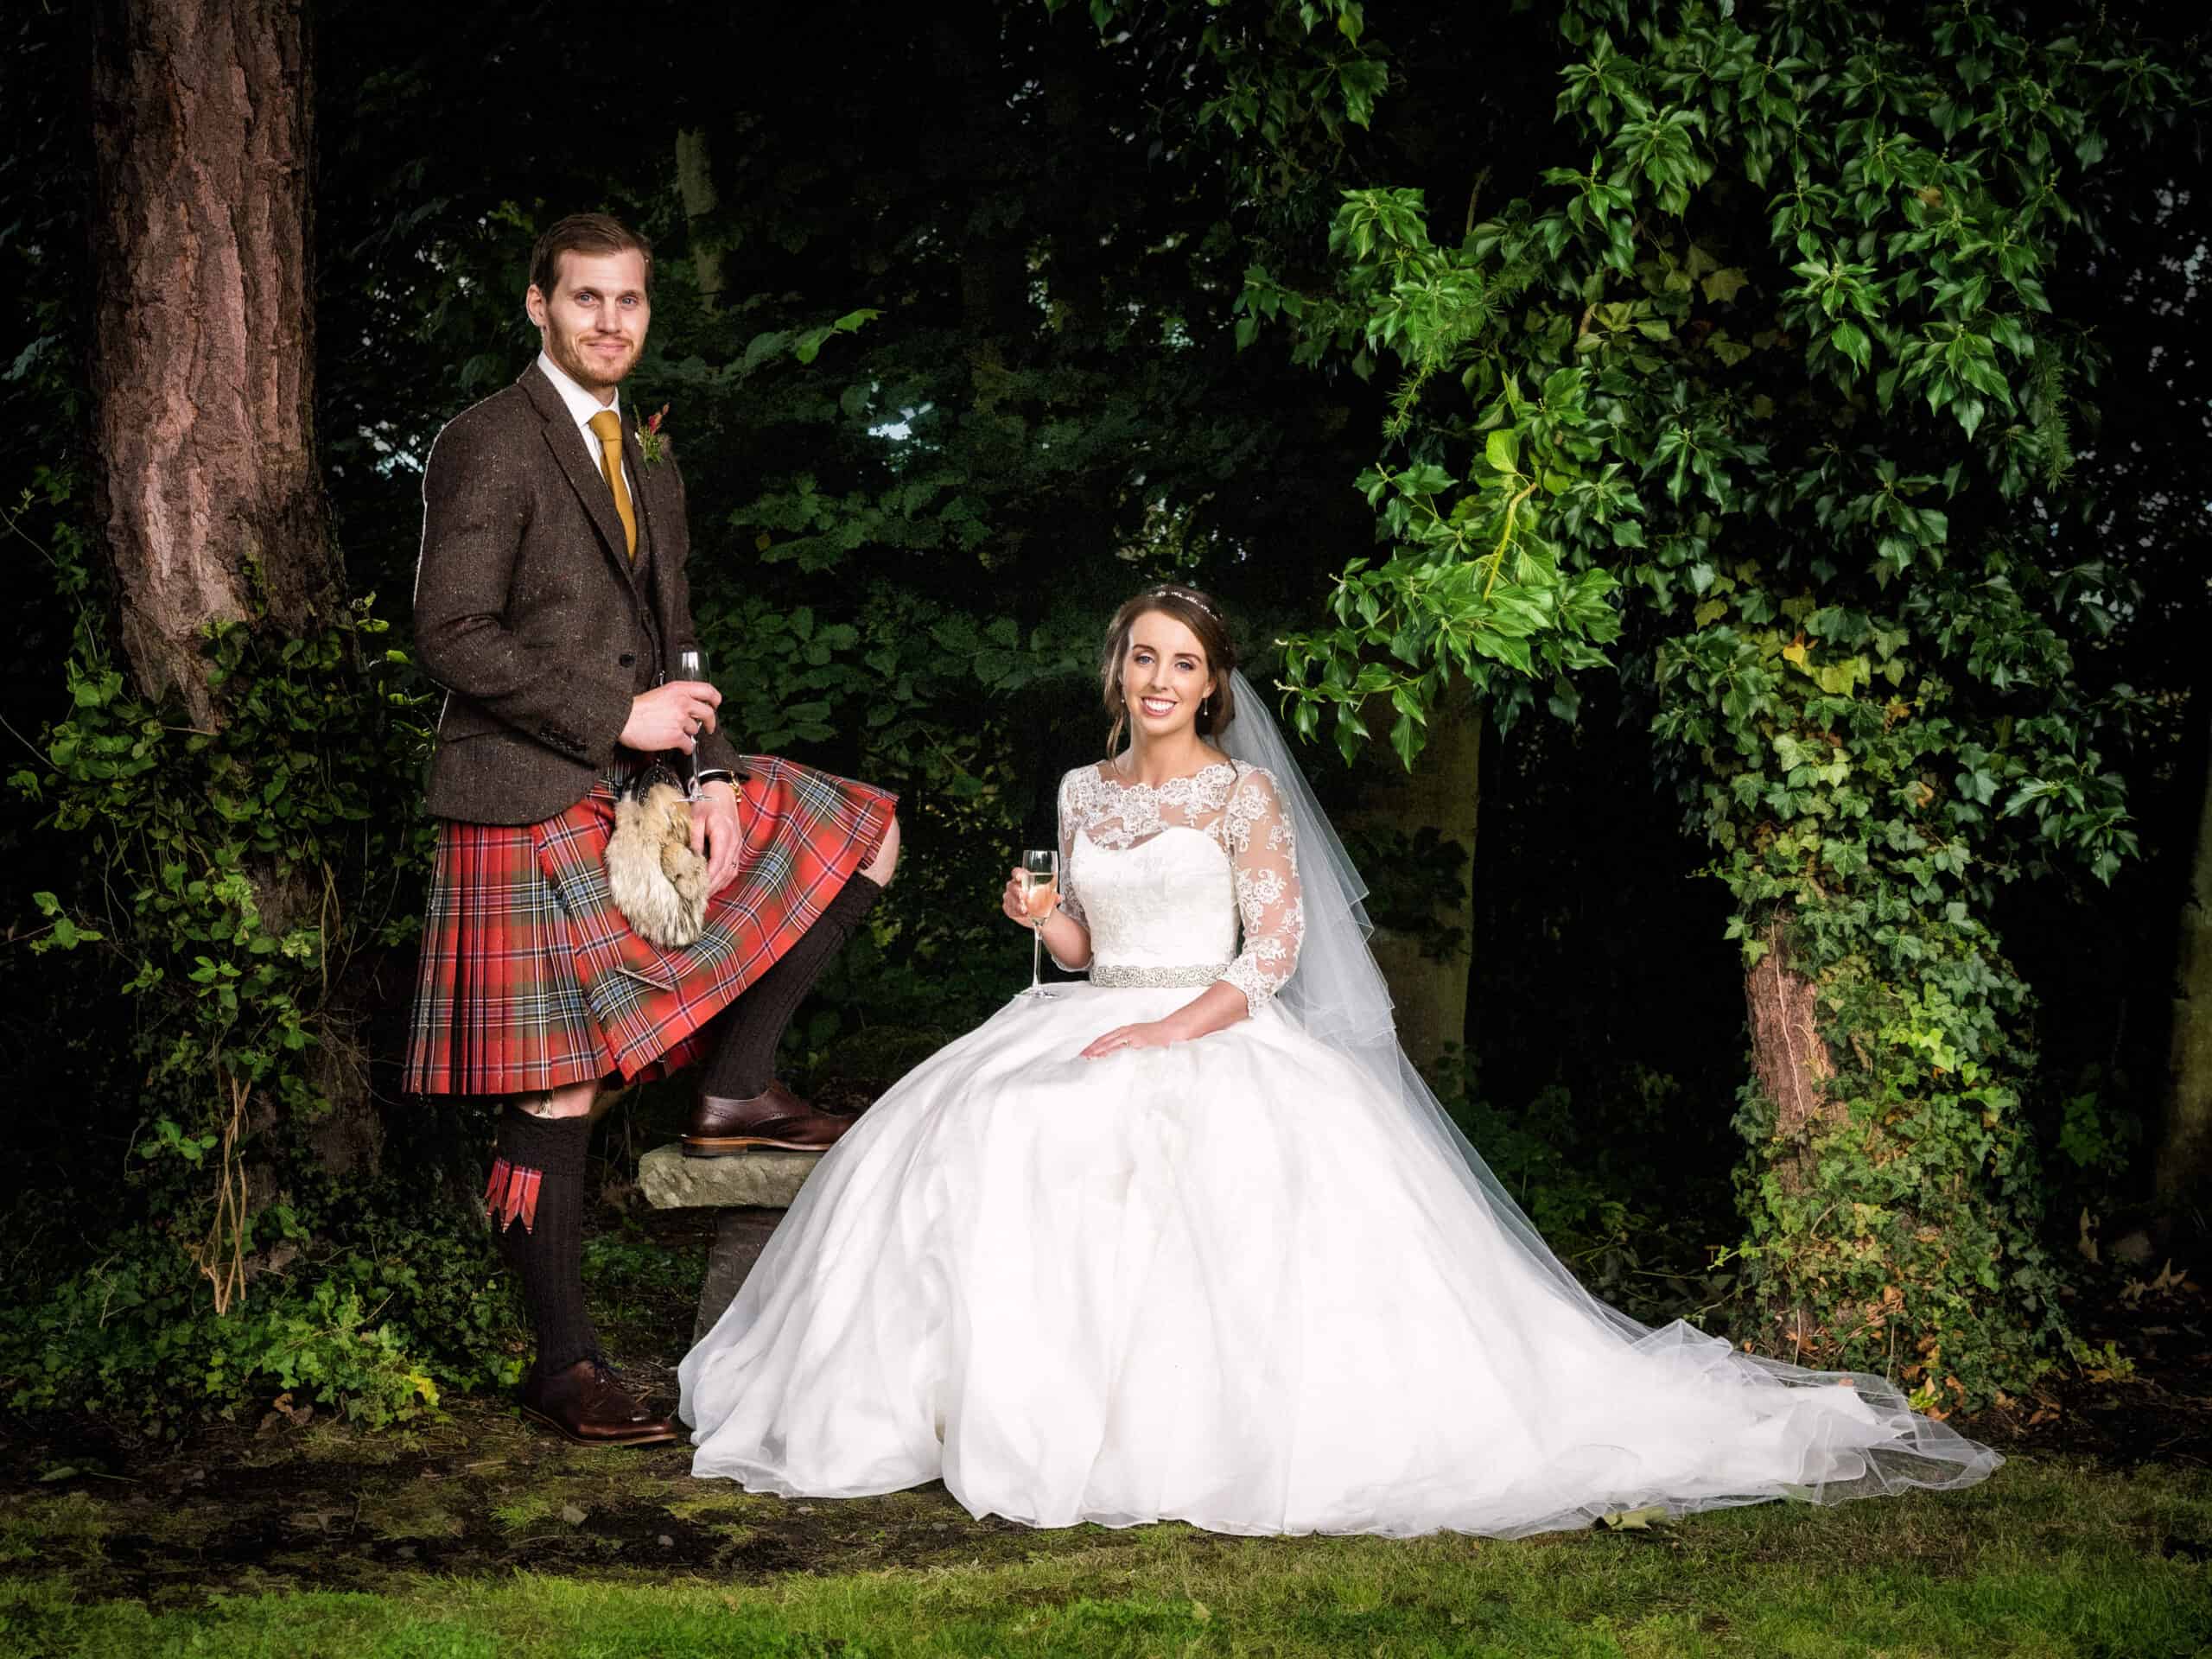 wedding photography pricing - you don't have to be the best photographer in the world